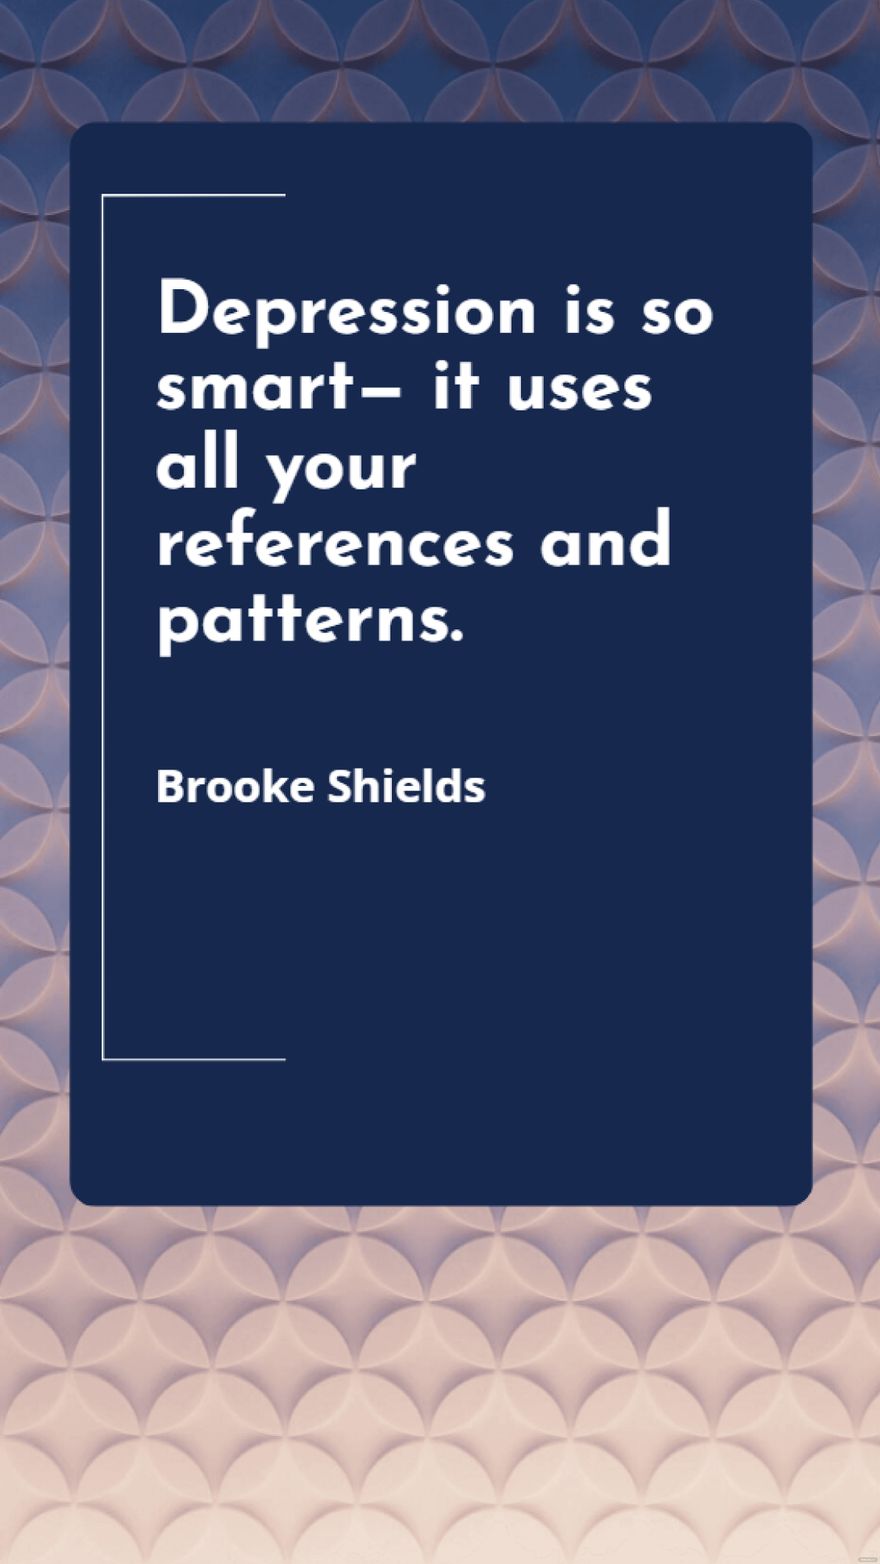 Brooke Shields - Depression is so smart - it uses all your references and patterns.